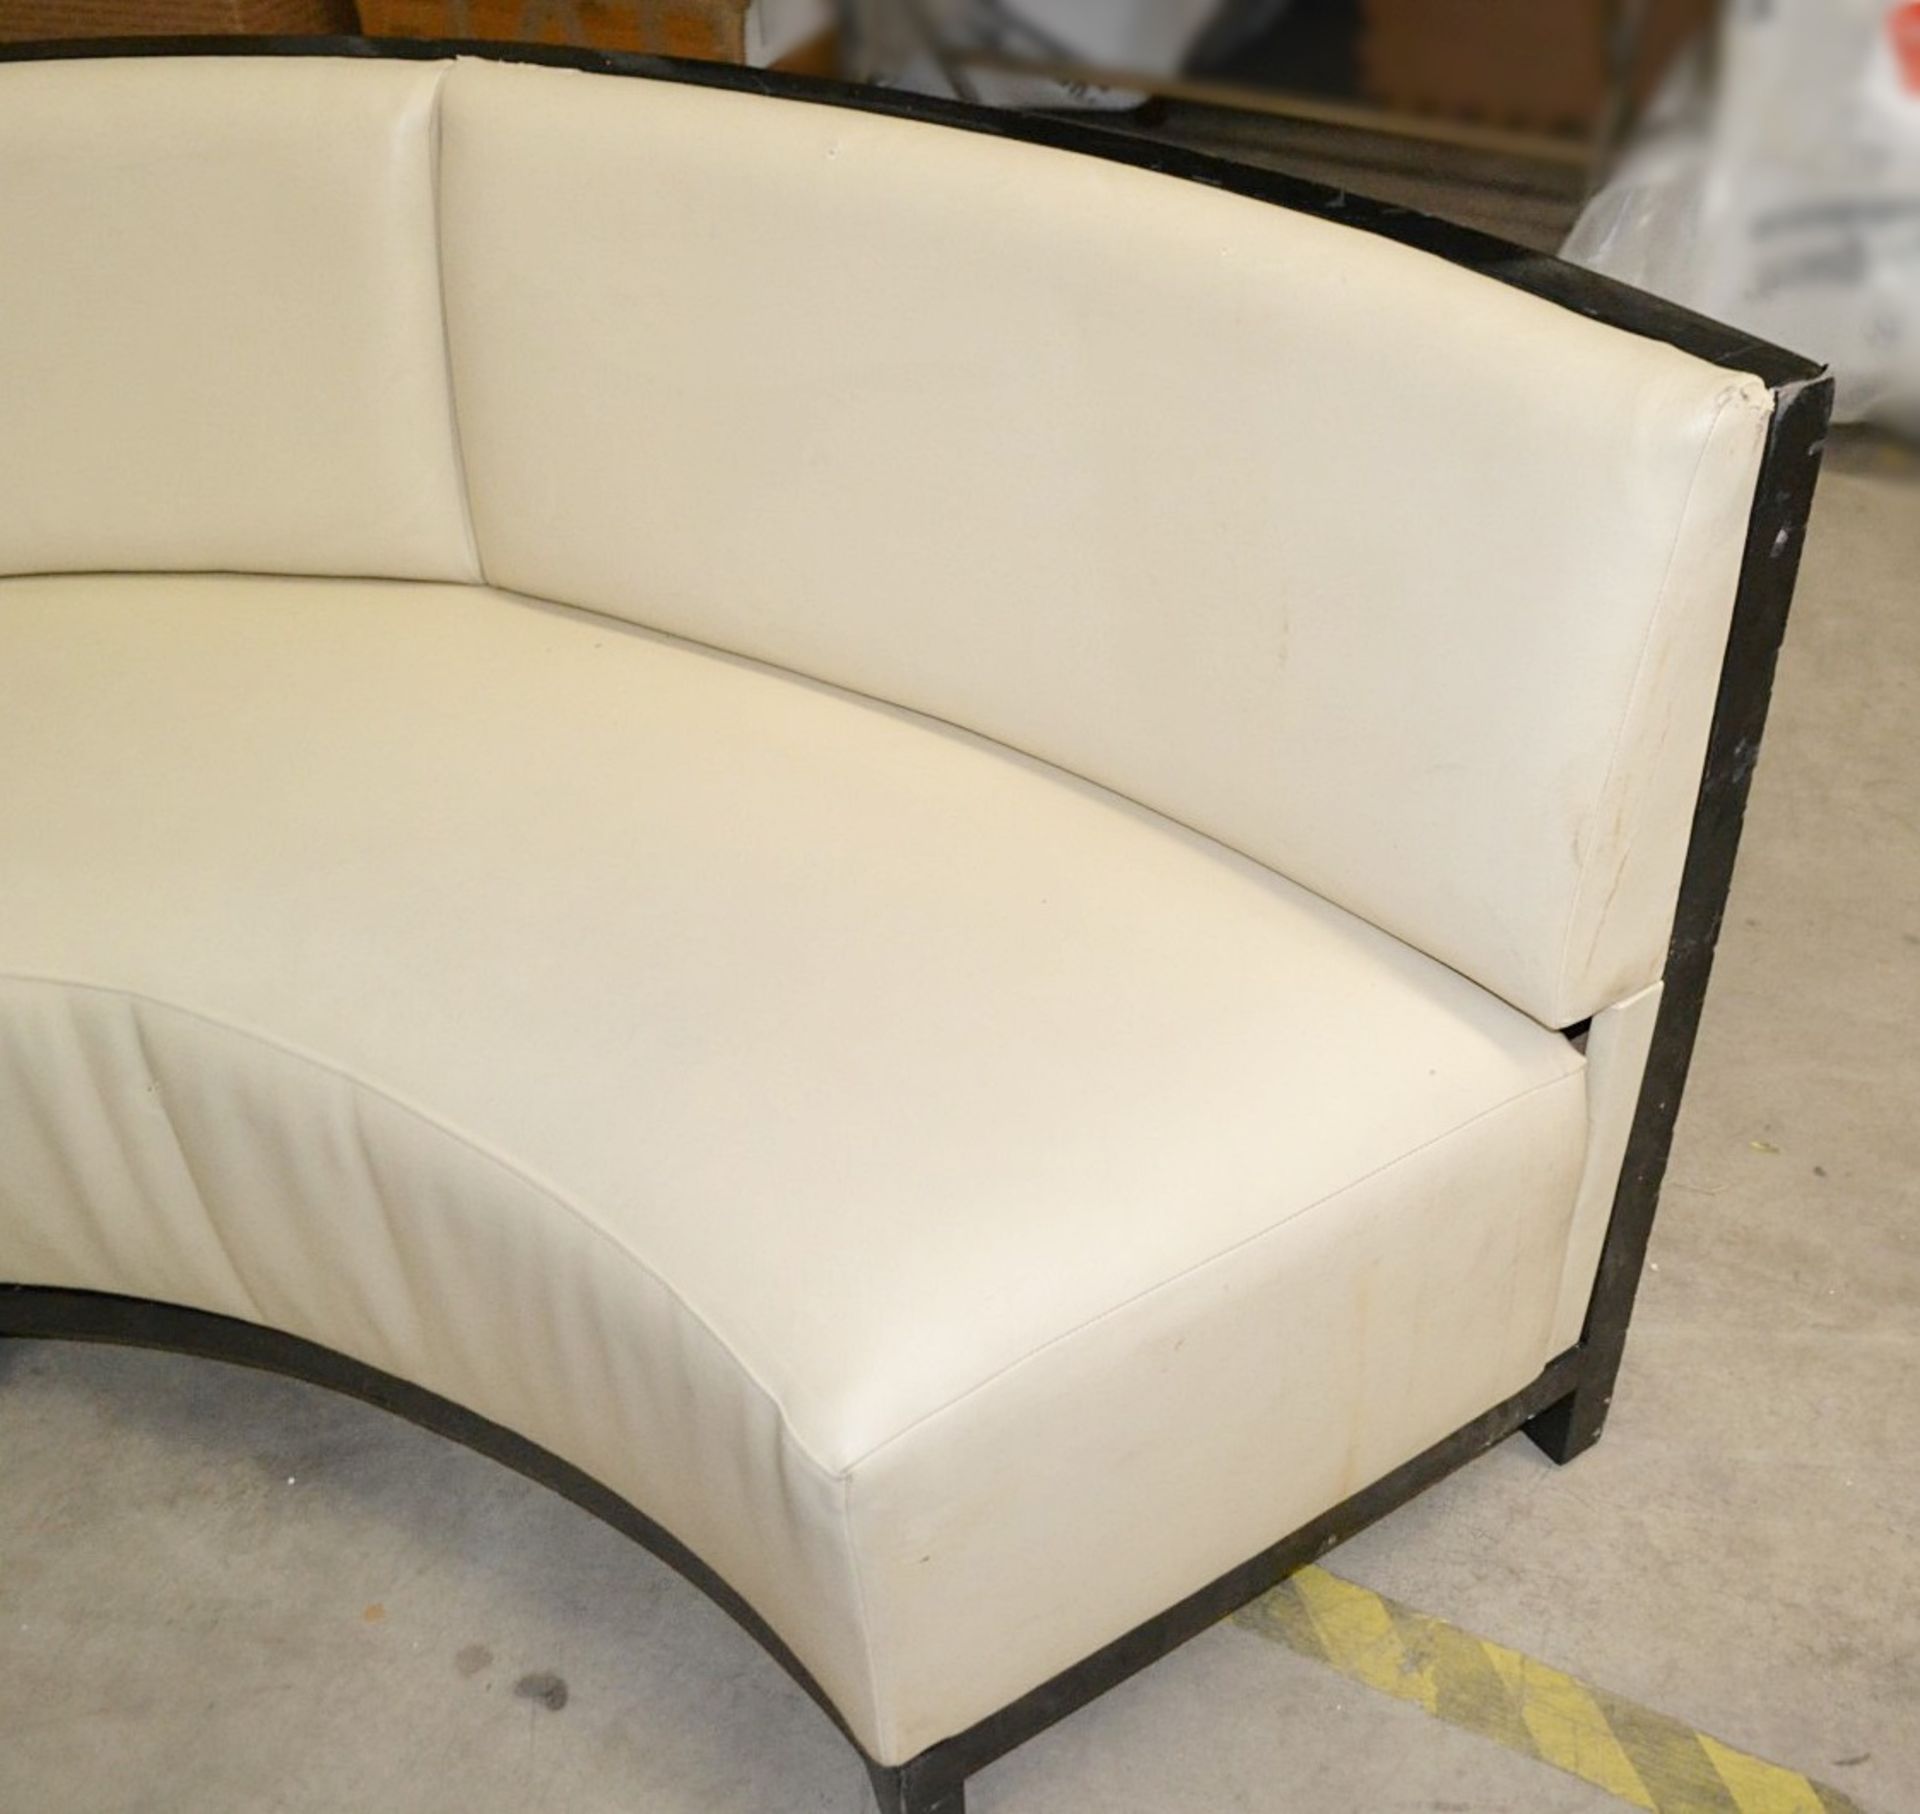 5 x Assorted Sections Of Curved Commercial Seating Upholstered In A Cream Faux Leather - Image 15 of 23